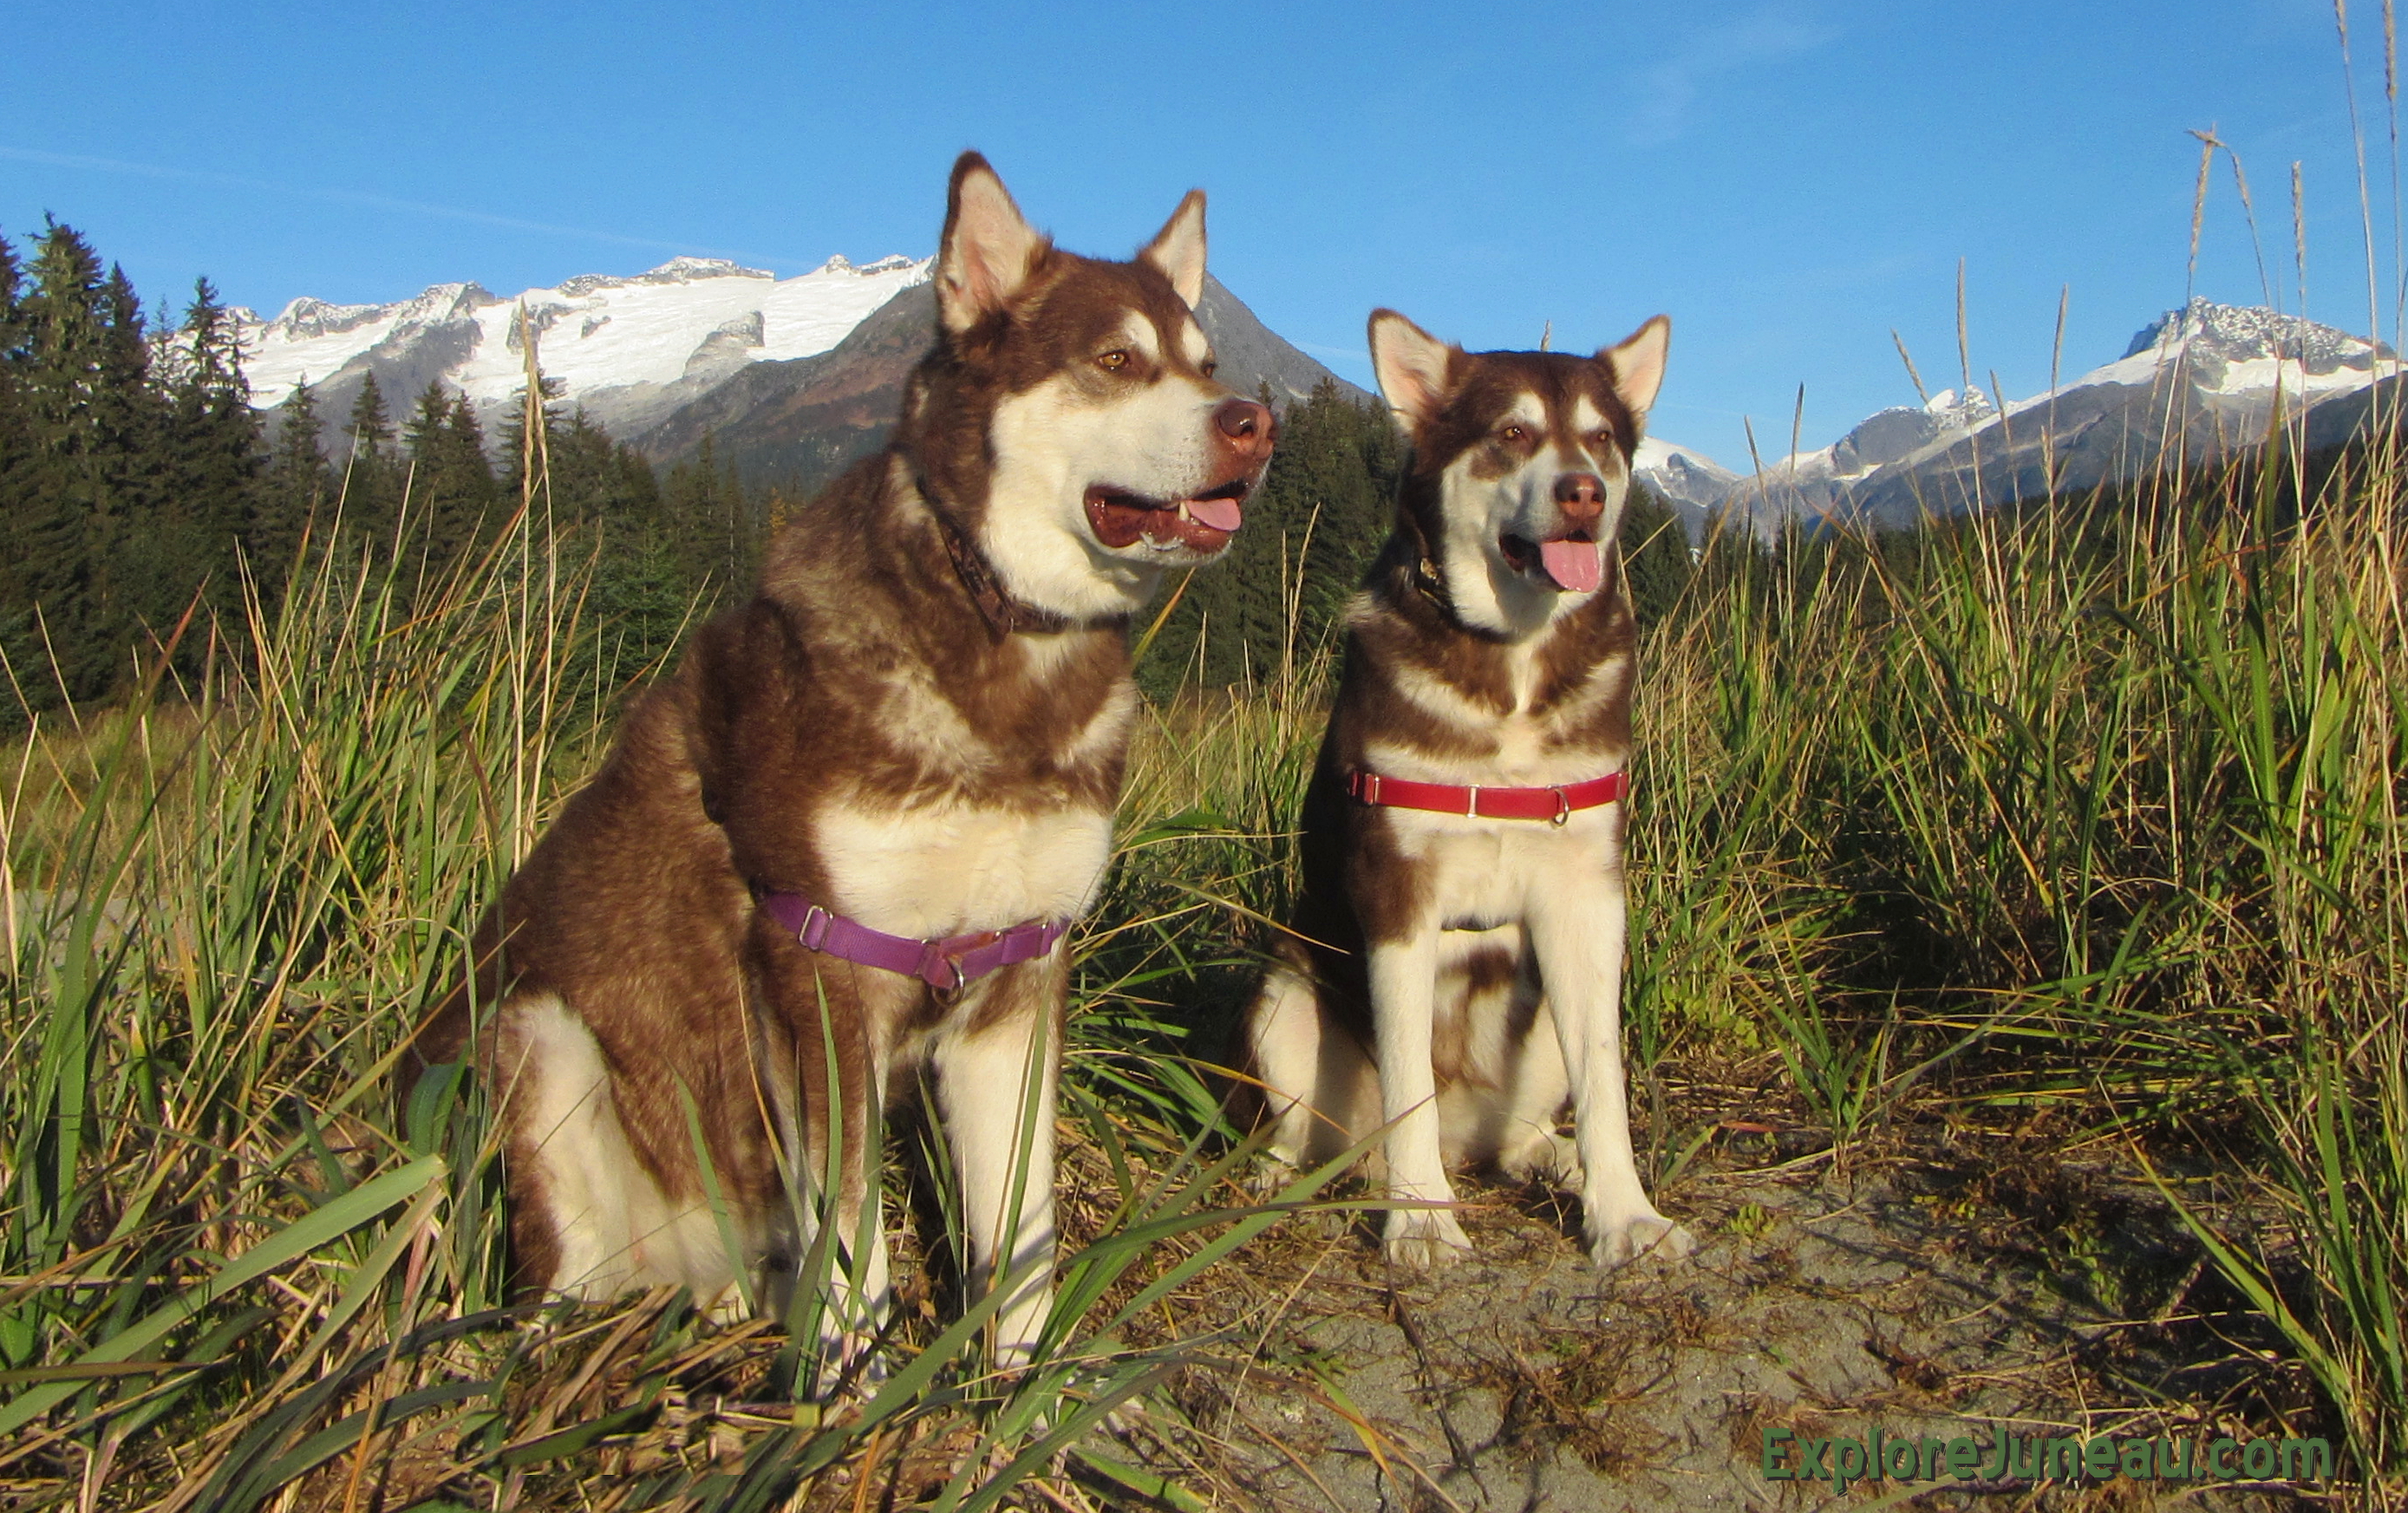 Skadi and Freya with Russell josh Peterson Eagle Beach Juneau Alaska. Thank you for your Kindness and Support. Please click 